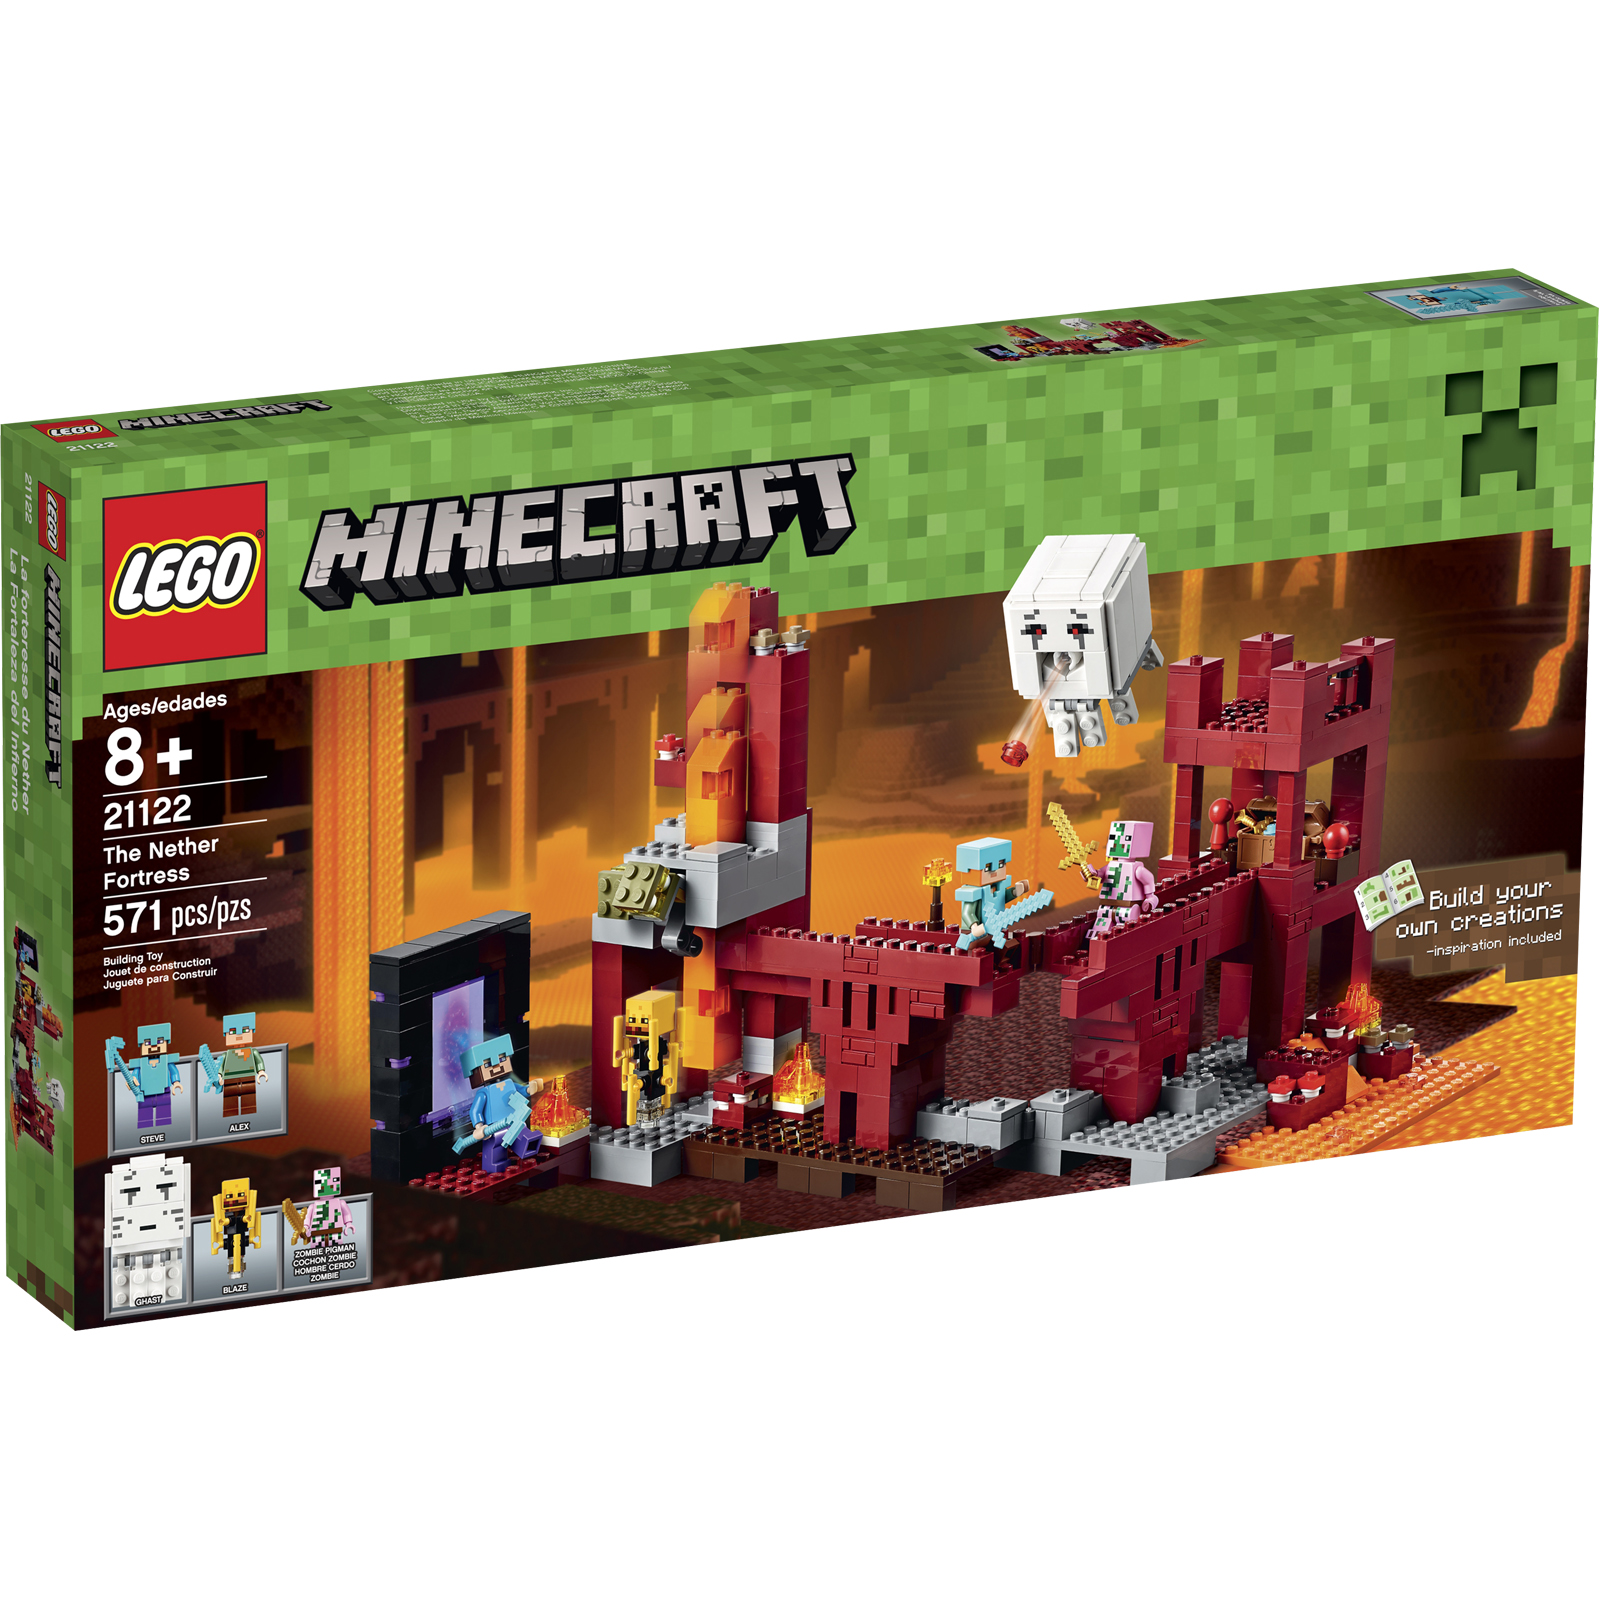 LEGO Minecraft The Nether Fortress #21122